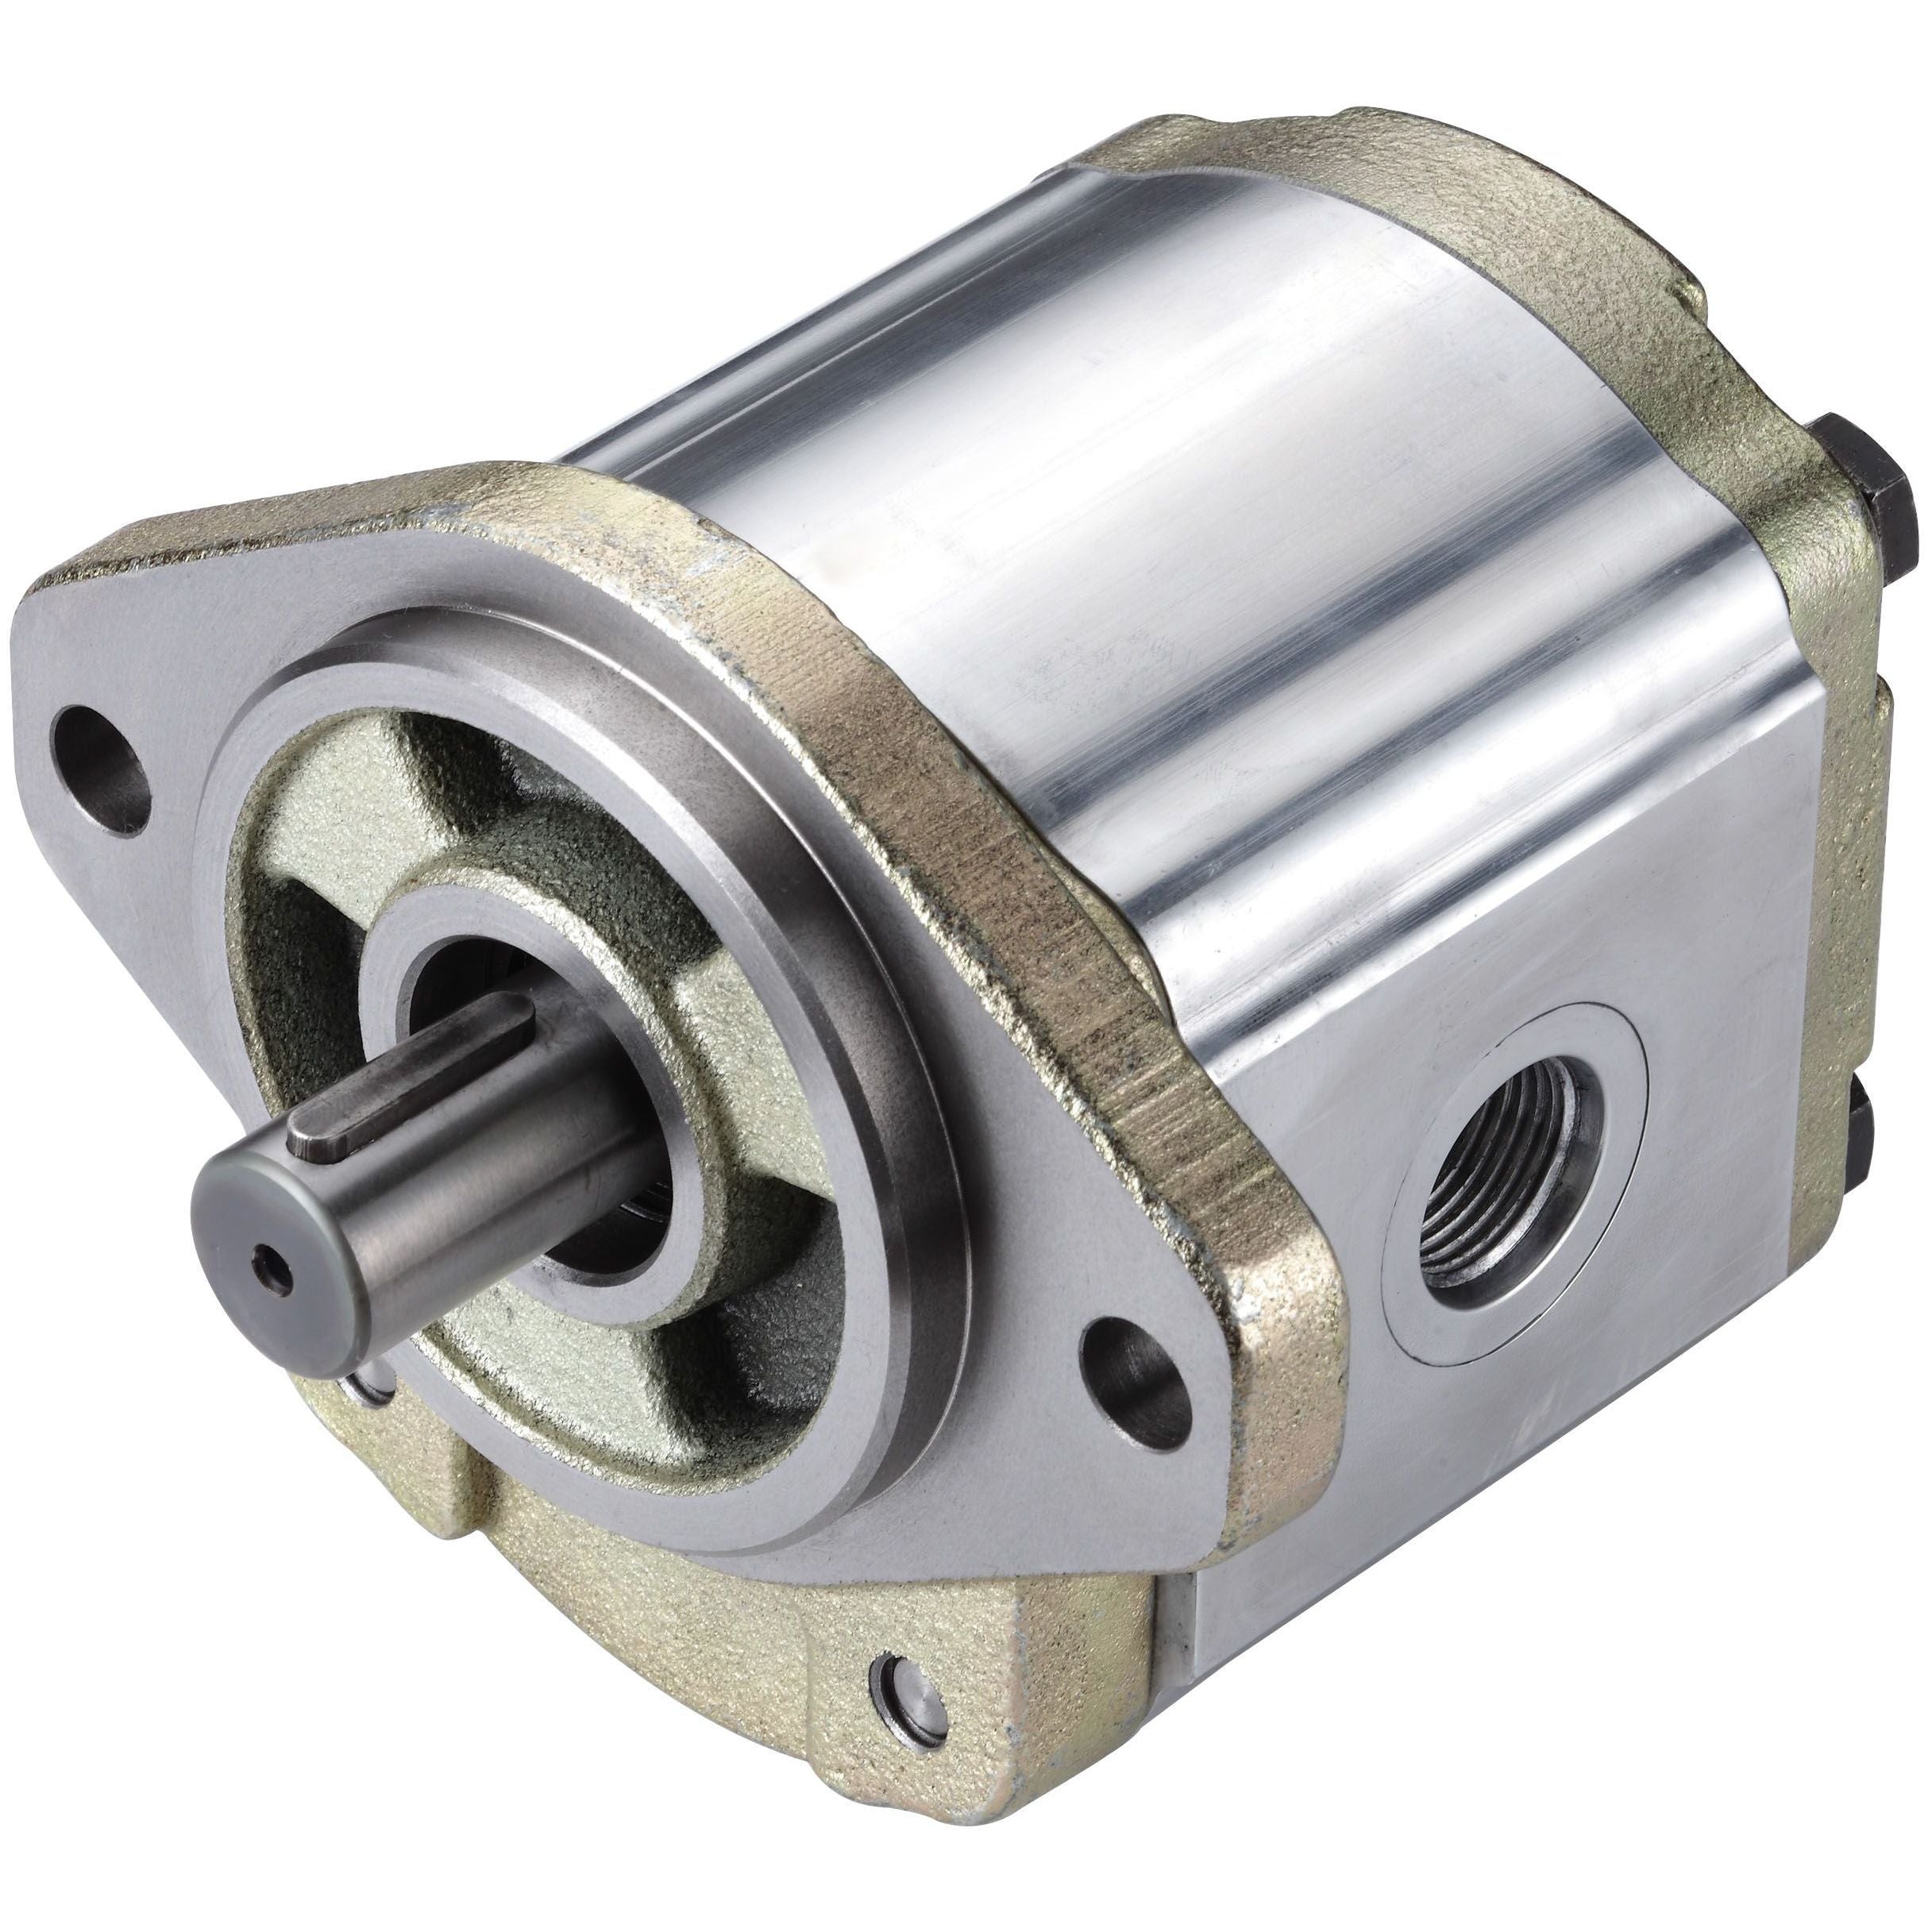 3GB8U344L : Honor Gear Pump, CCW Rotation, 44cc (2.69in3), 20.92 GPM, 3100psi, 2500 RPM, #24 SAE (1.5") In, #16 SAE (1") Out, Splined Shaft 13-Tooth, 16/32 Pitch, SAE B 2-Bolt Mount